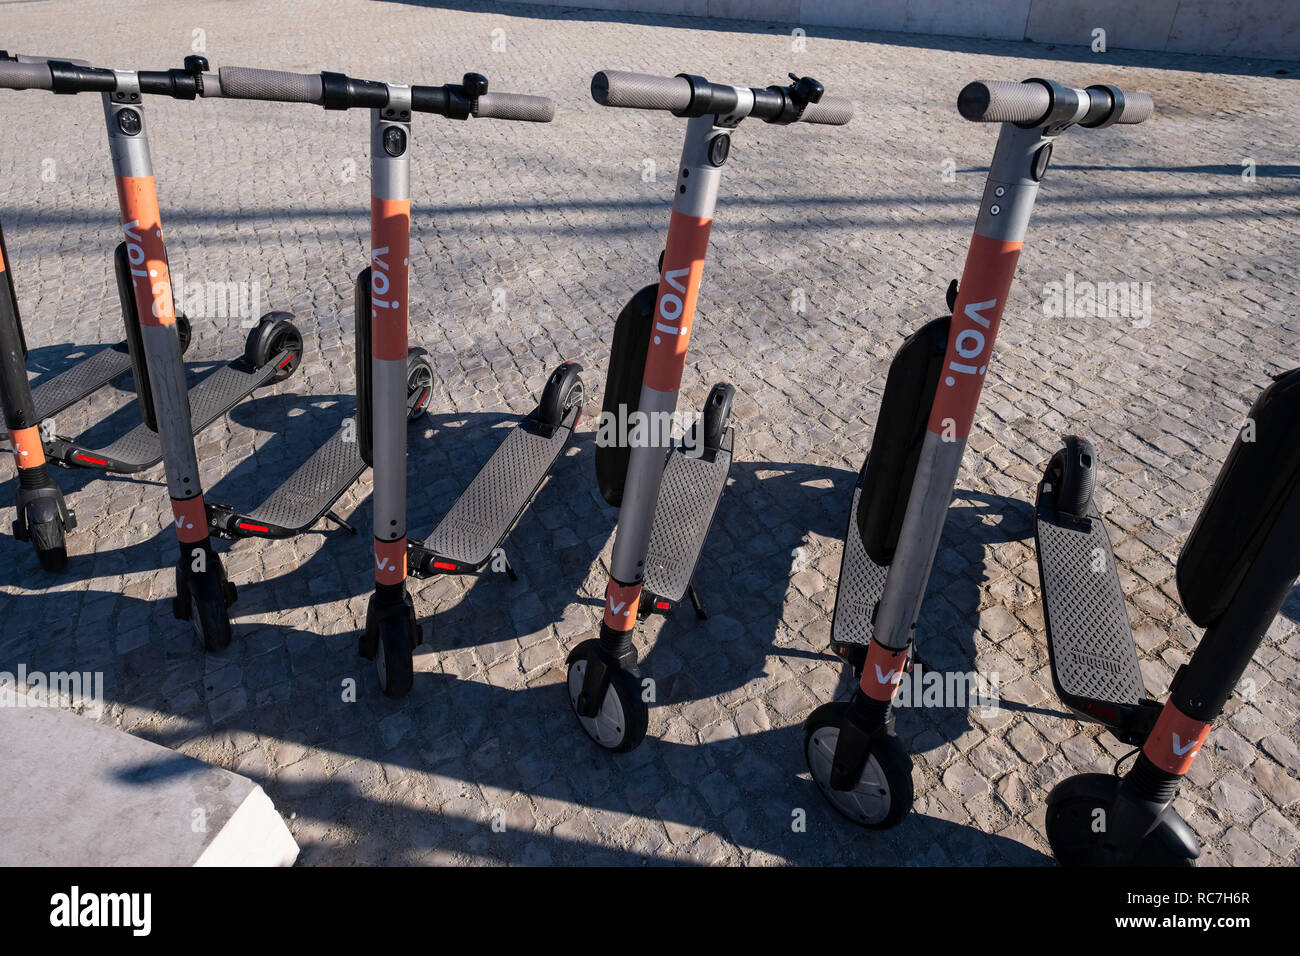 VOI dockless electric scooters for rental Stock Photo